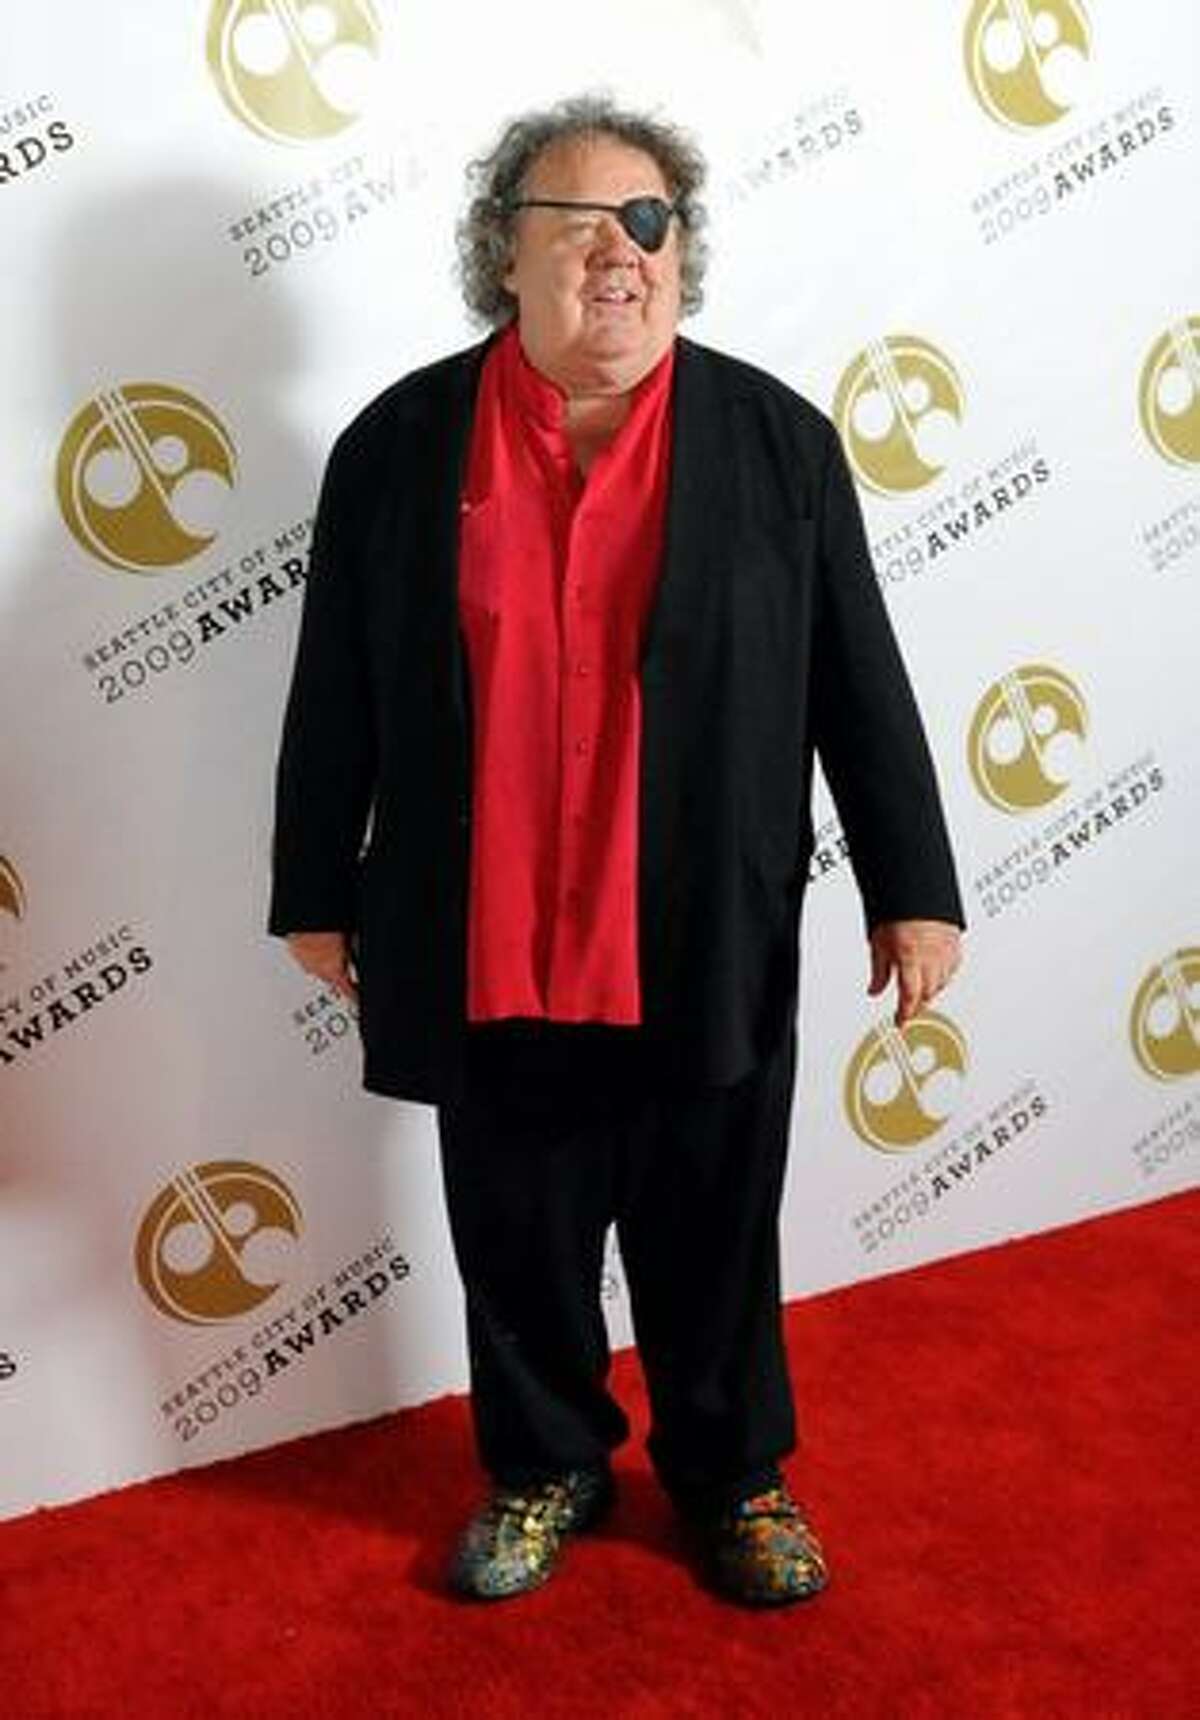 Glass artist Dale Chihuly arrives at the 2009 Seattle City of Music Awards on Wednesday. Chihuly created and designed the awards presented to the winners.